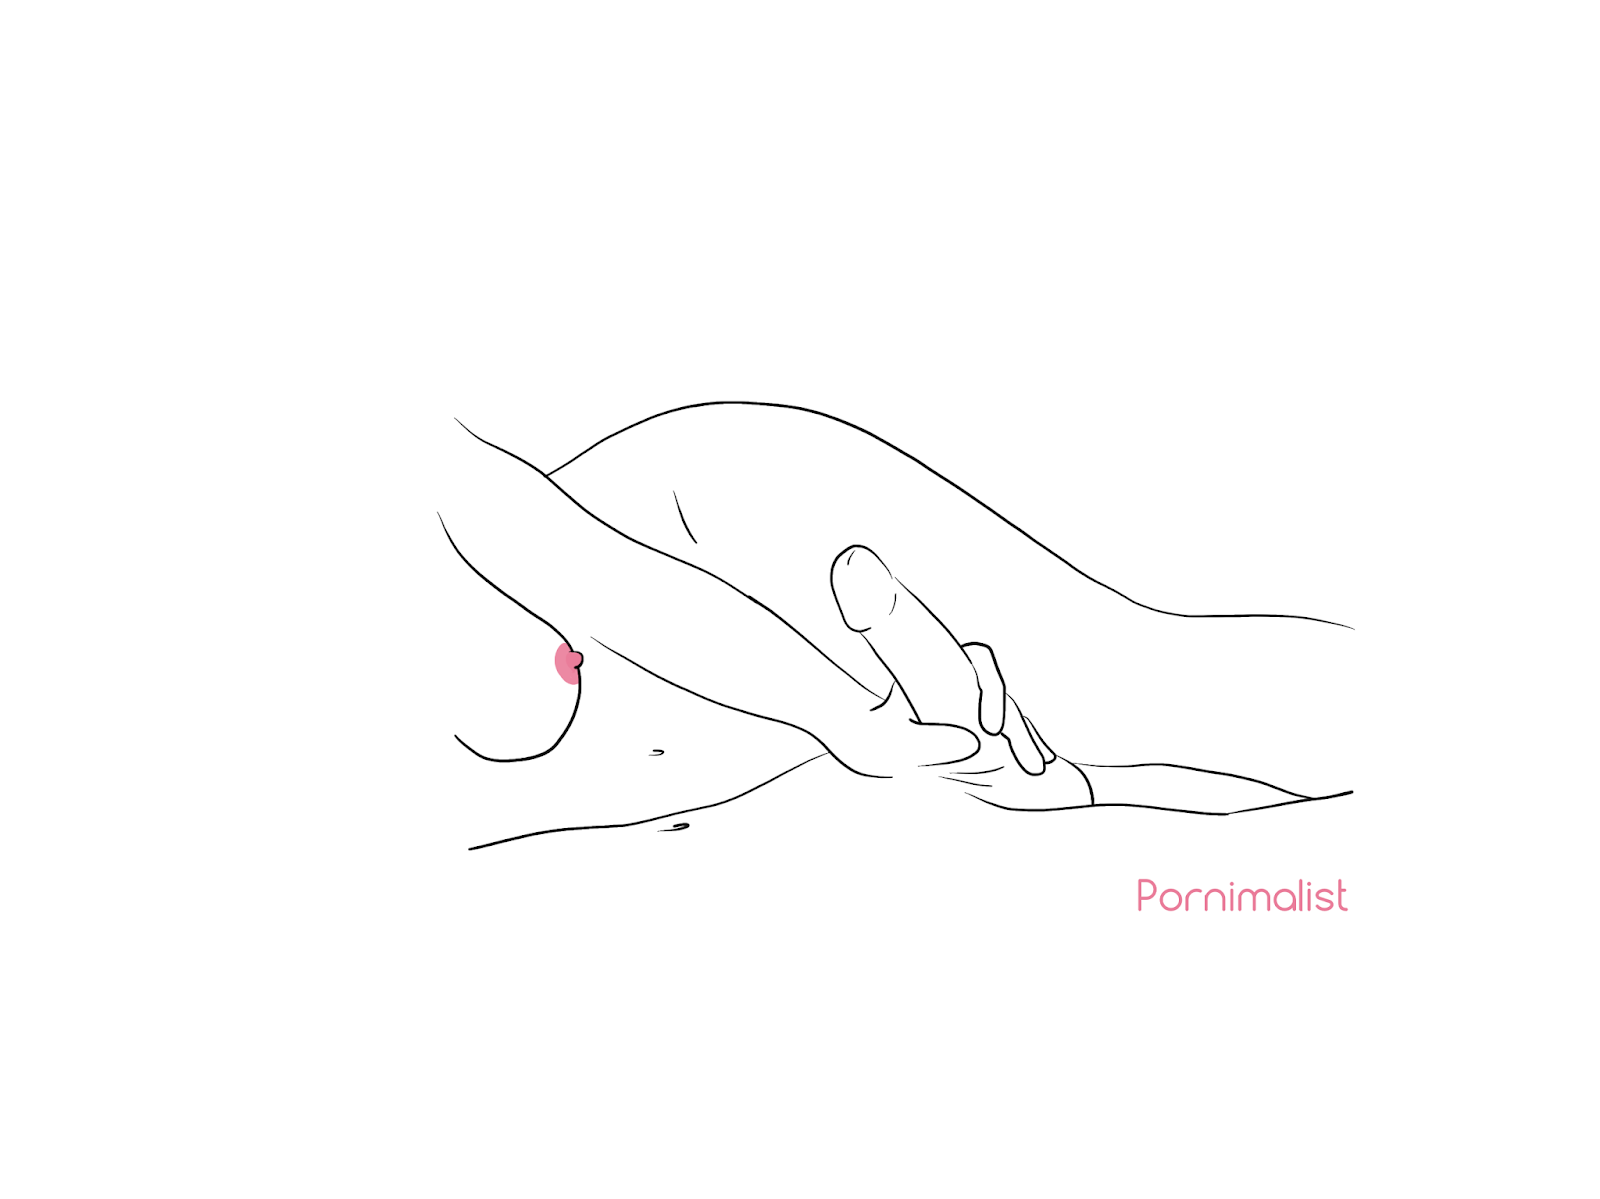 Photo by pornimalist with the username @pornimalist, who is a verified user,  September 13, 2020 at 6:30 AM. The post is about the topic Art-nude Illustrations and the text says 'Pornimalist
Minimalist drawings Maximalist desires

#handjob'